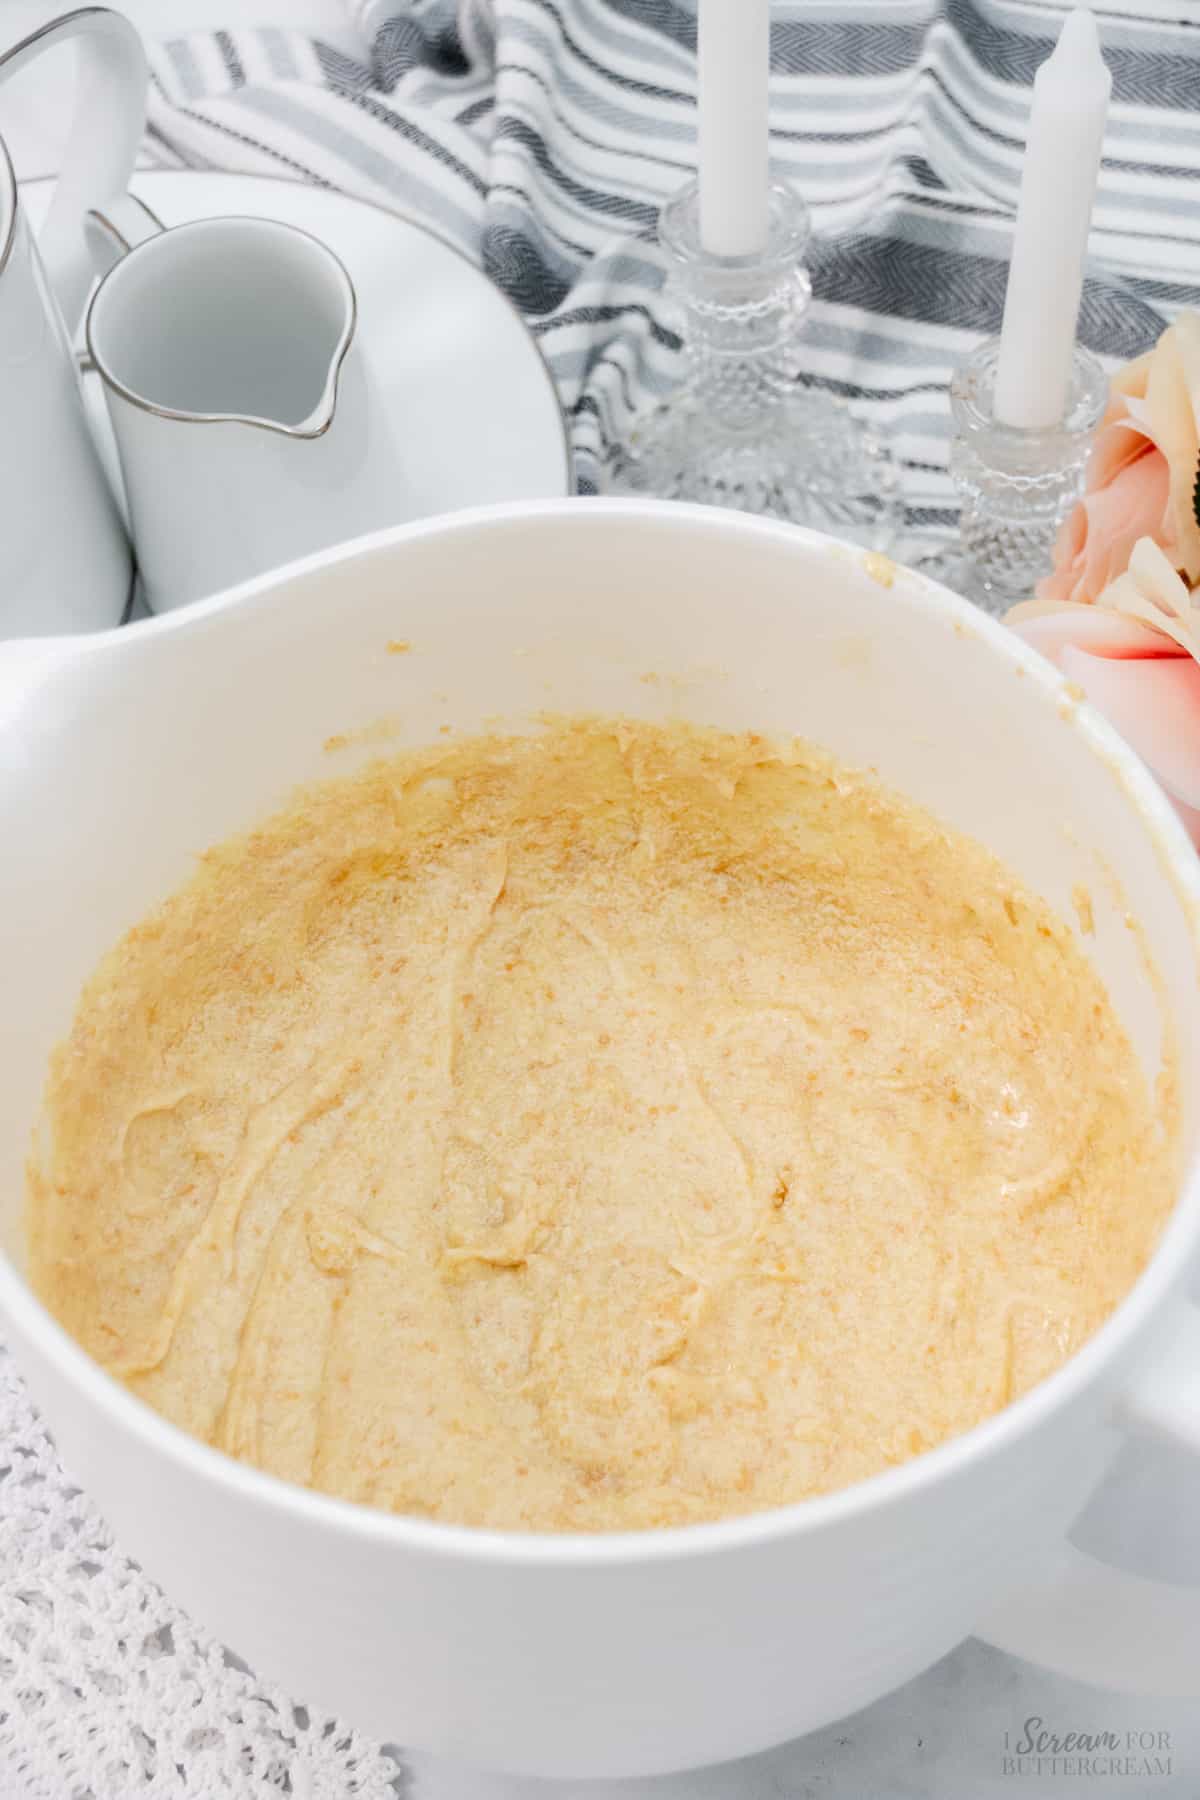 Crushed vanilla wafer crumbs added to vanilla bundt cake batter in a large white mixing bowl.